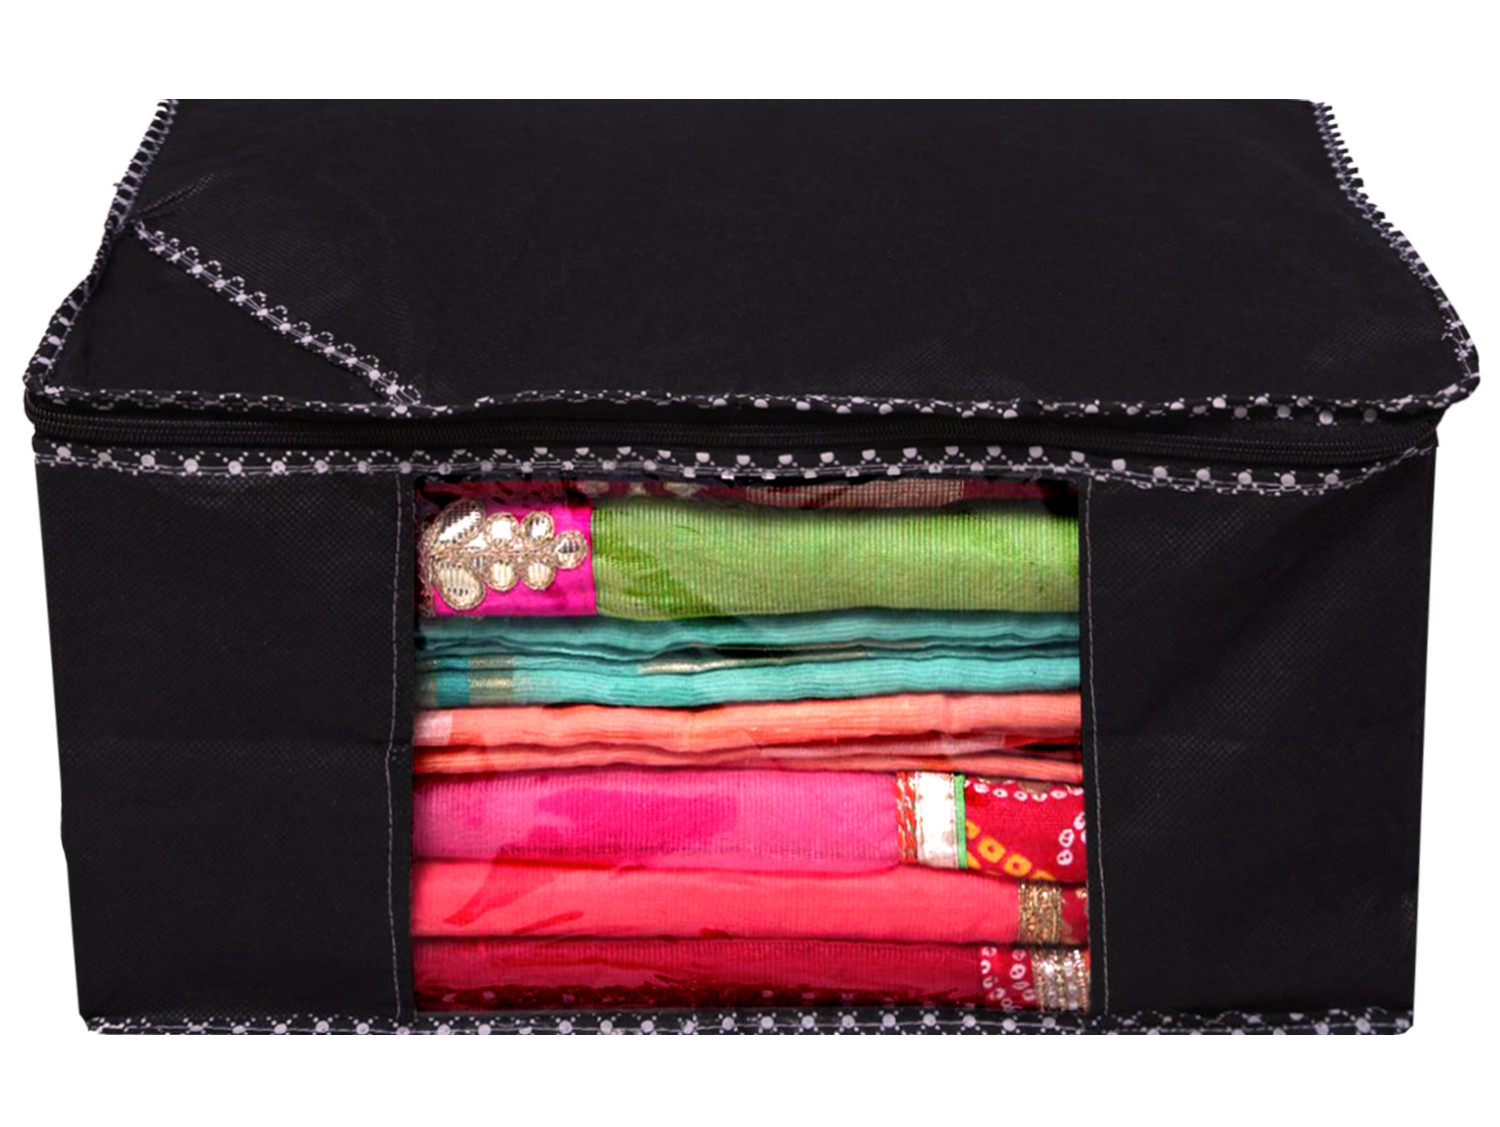 Kuber Industries Non Woven Saree Cover And Underbed Storage Bag, Cloth Organizer For Storage, Blanket Cover Combo Set (Black) -CTKTC38463